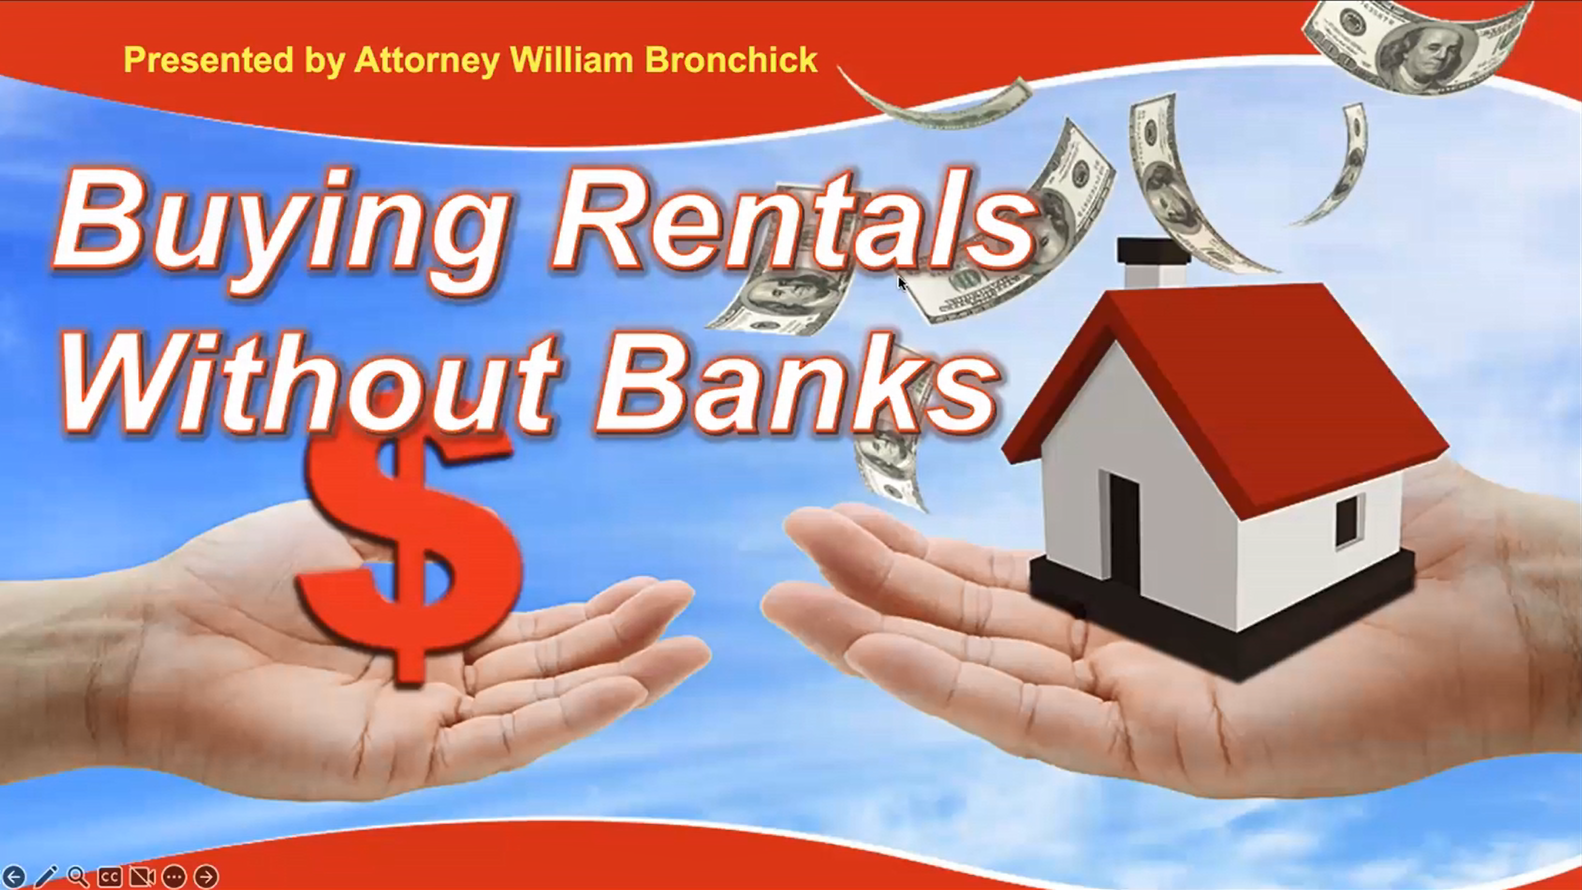 William Bronchick on Buying Rental Properties Without Banks or Credit